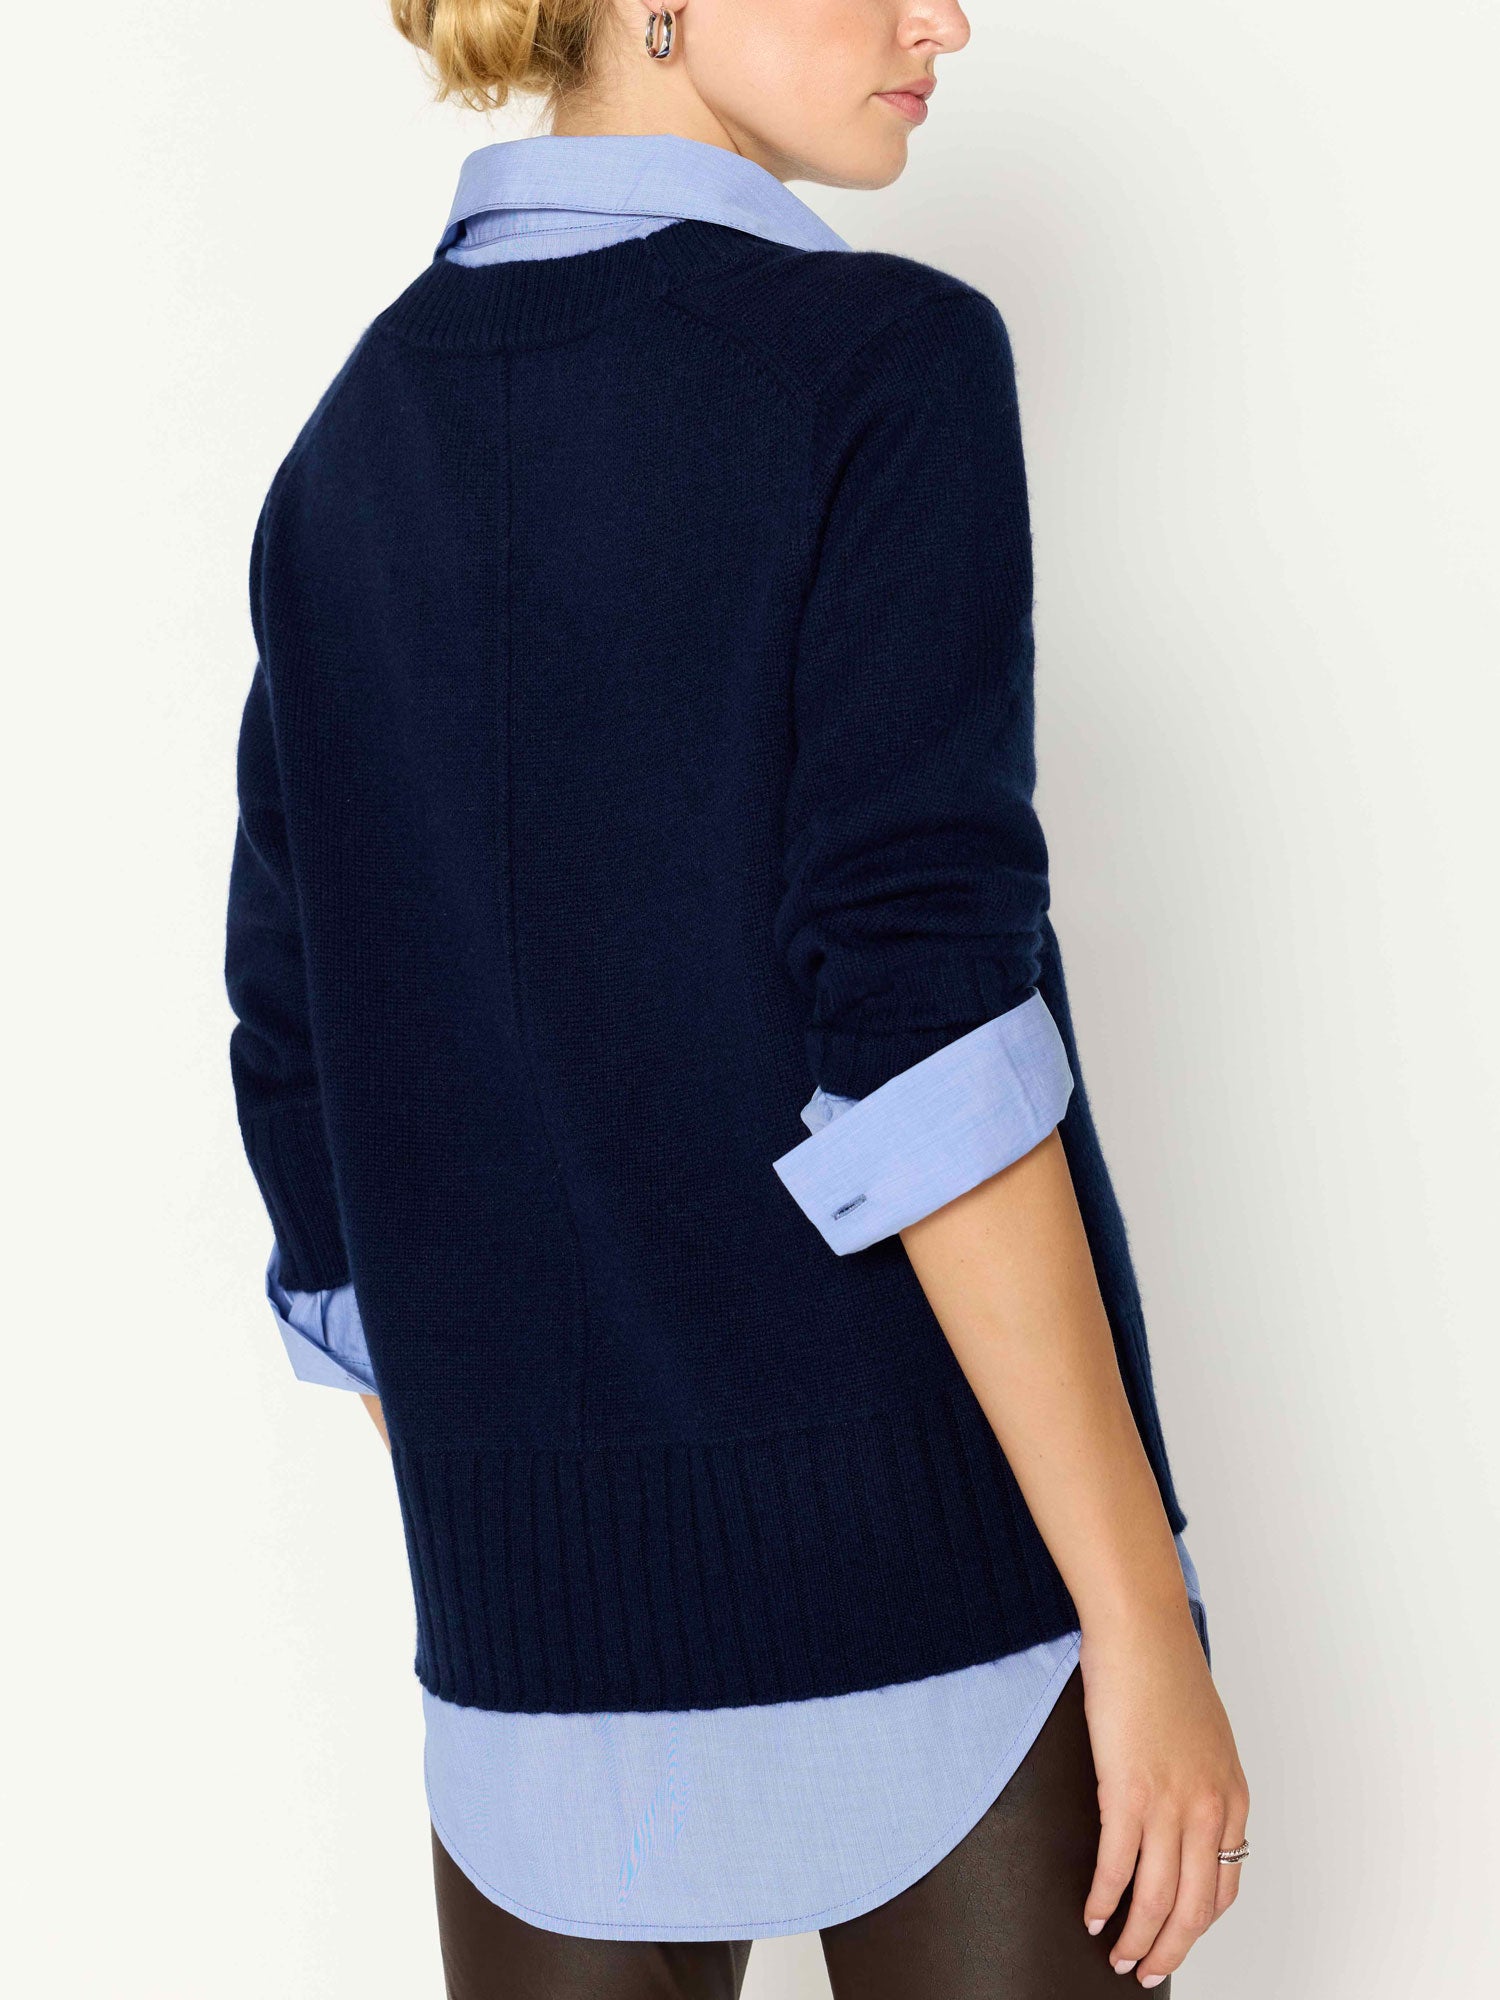 Arden navy blue oxford layered v-neck sweater back view